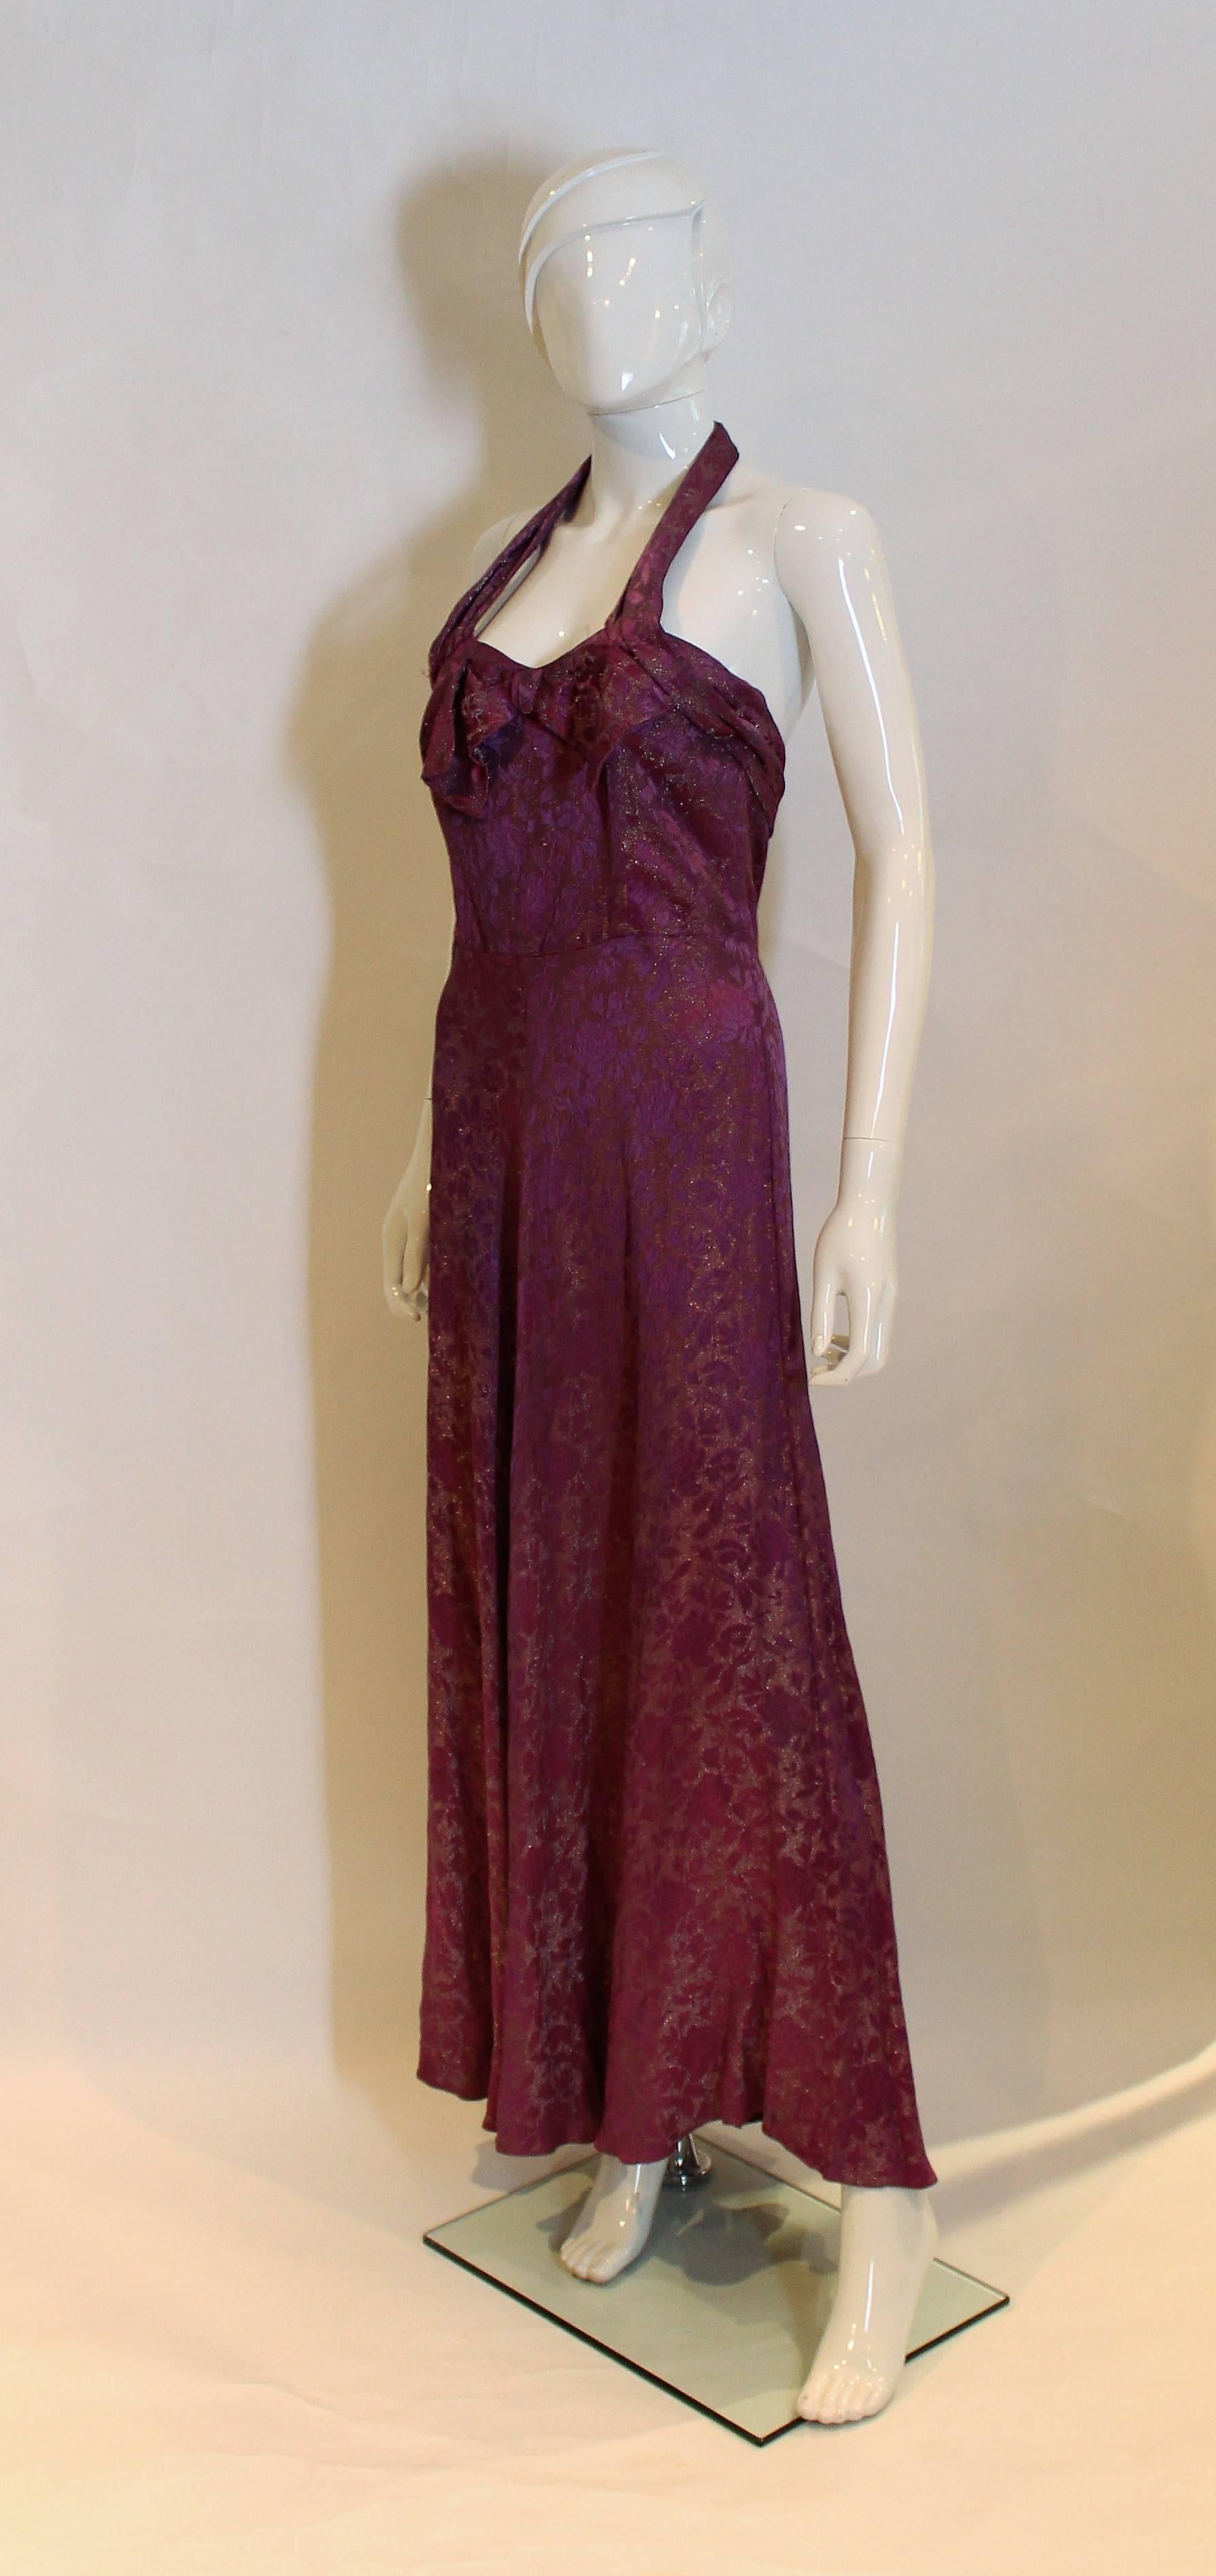 A stunning Lame gown in a pretty purple colour. The dress has a halter neck, fold over detail at the front and back and central back zip.